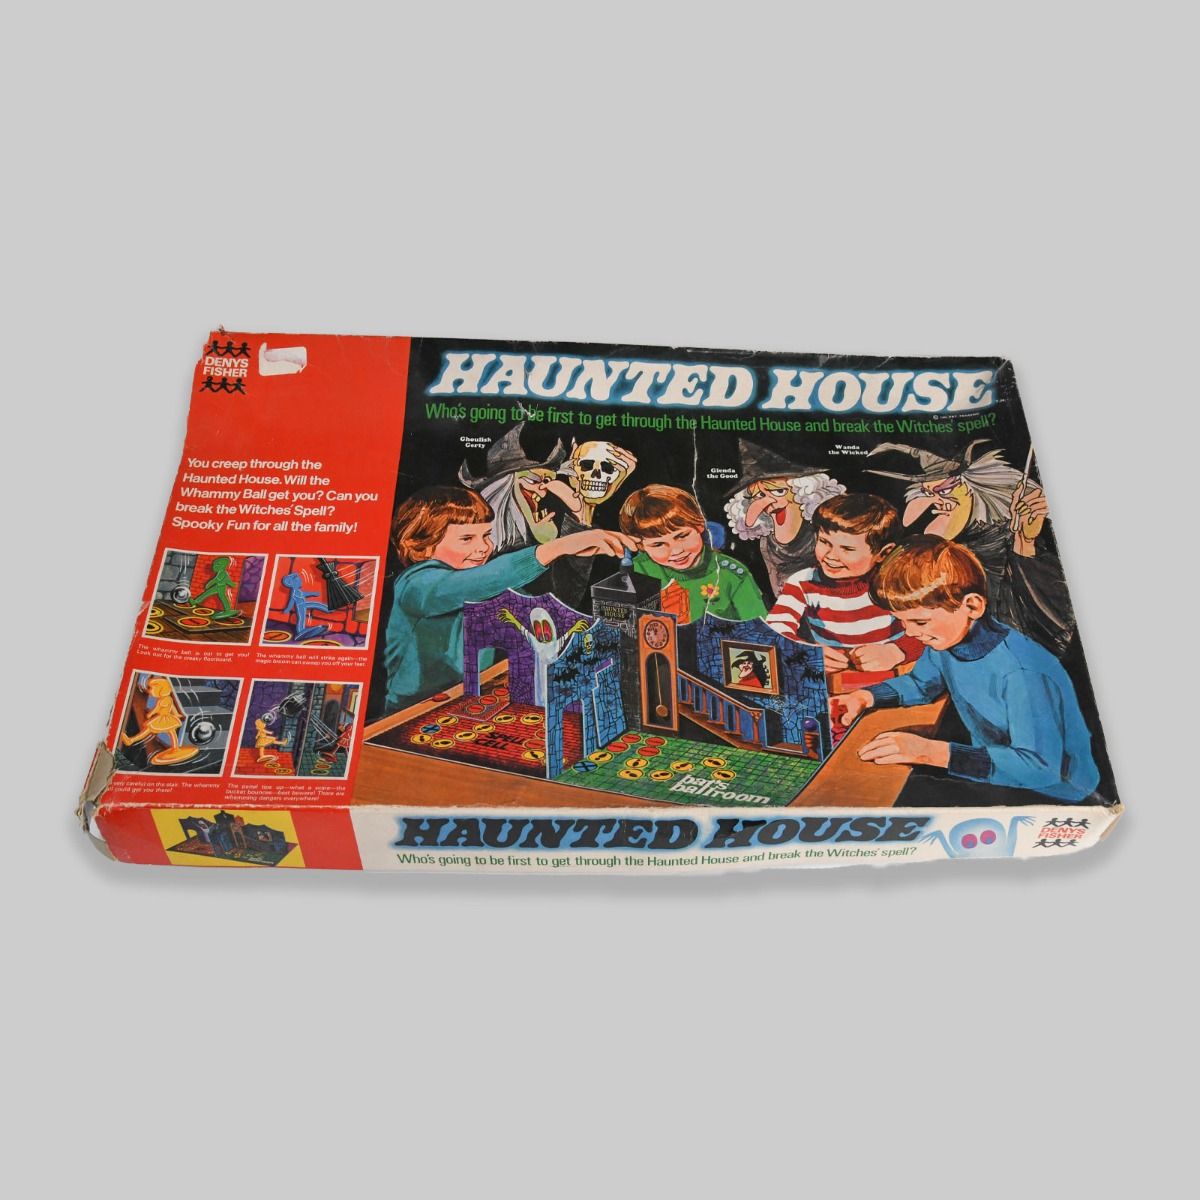 'Haunted House' 1971 Board Game